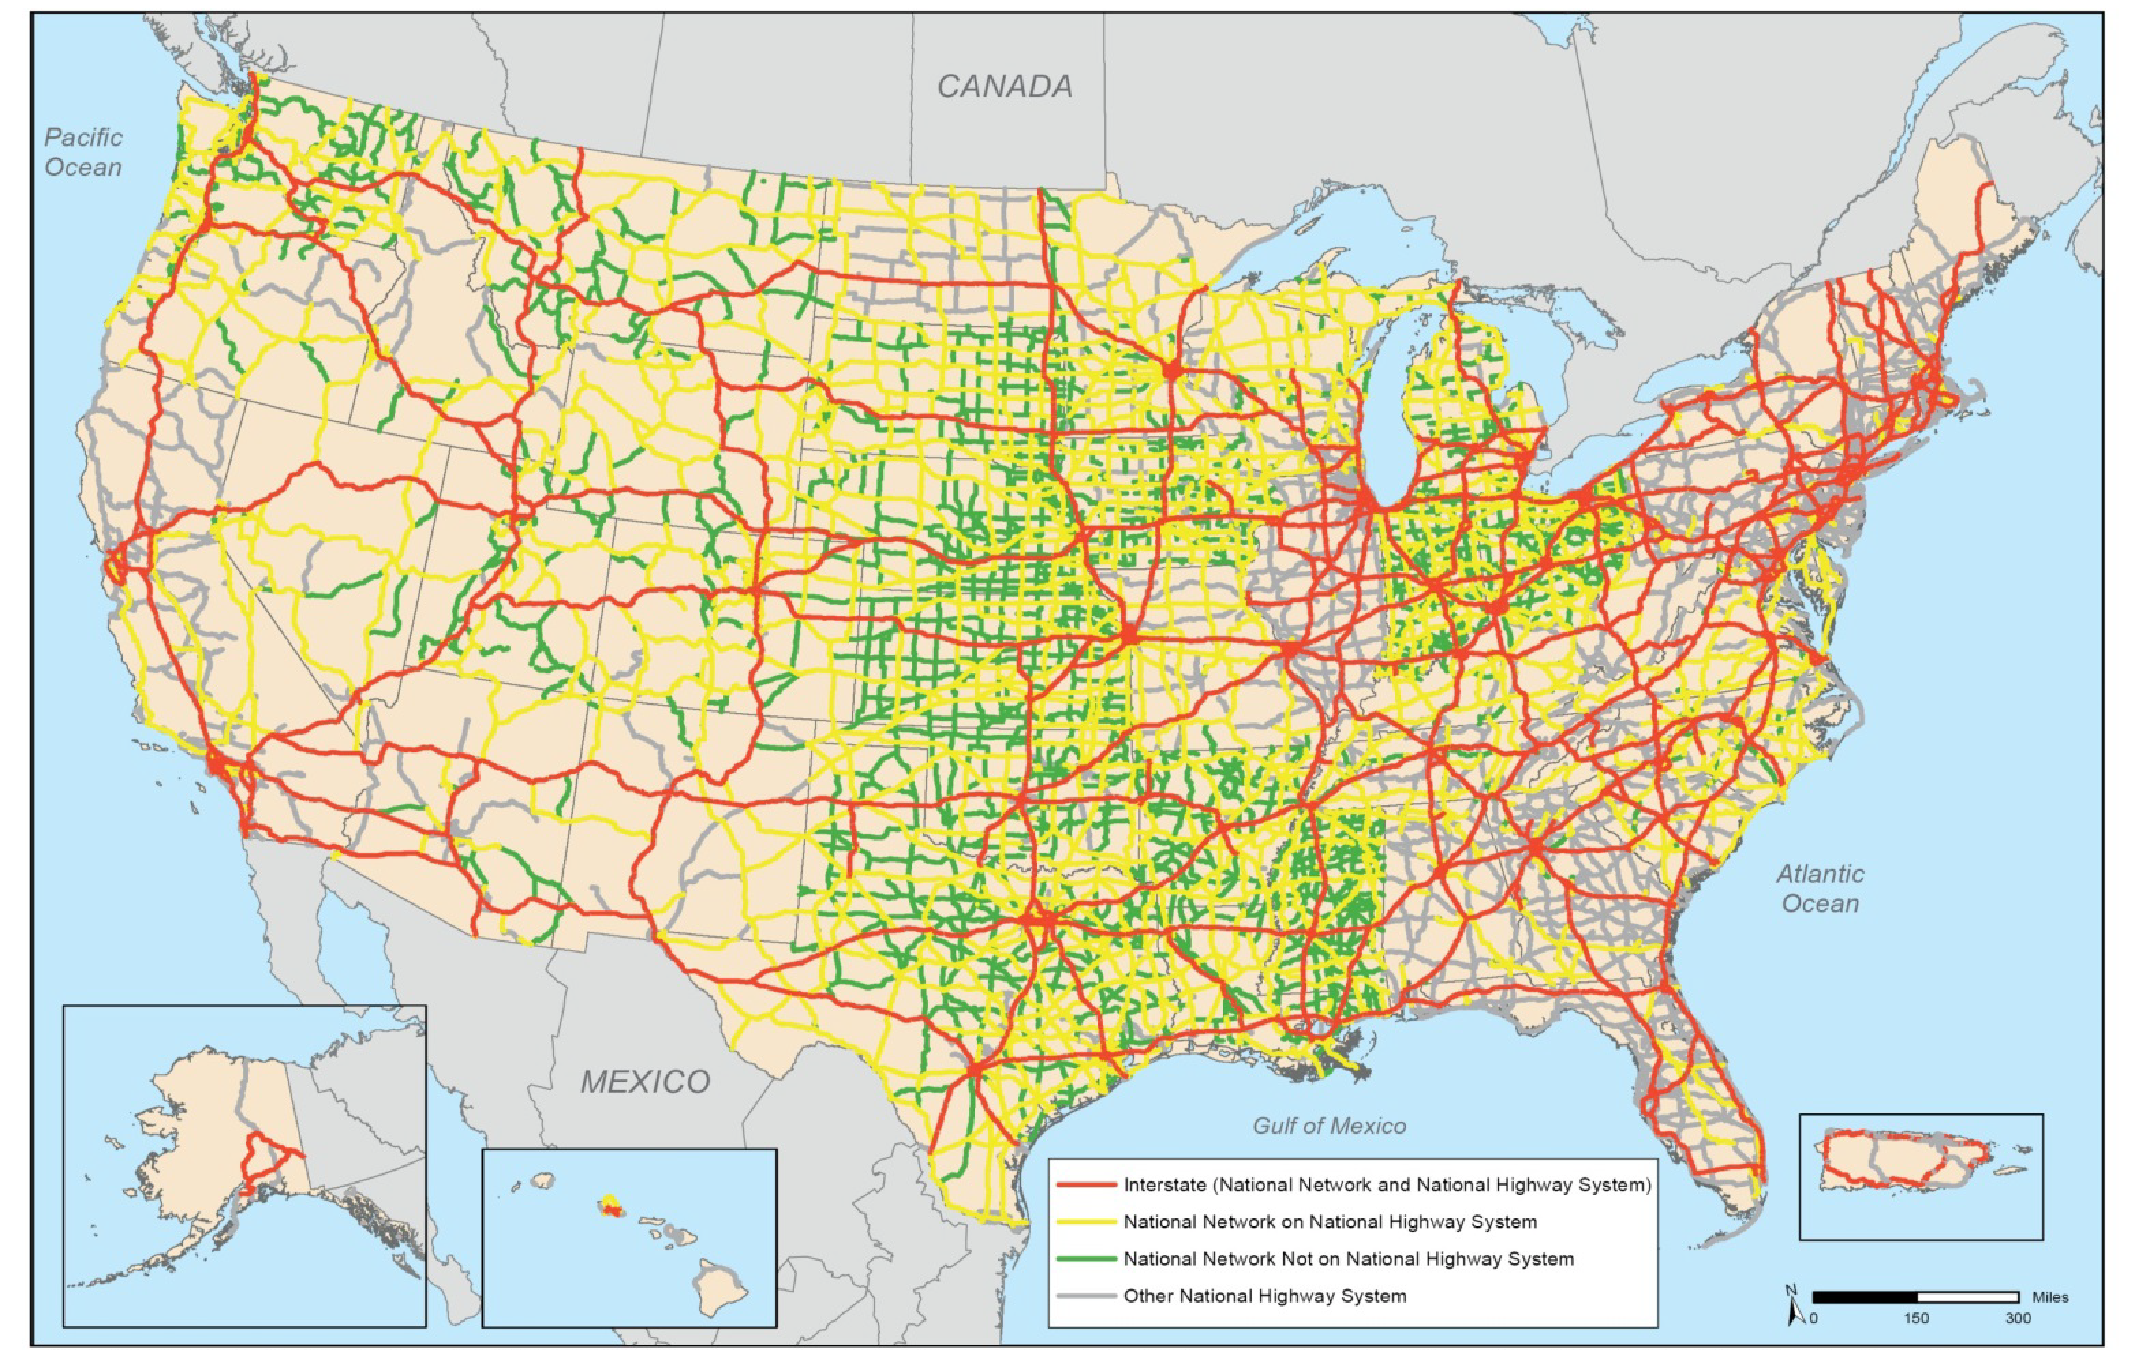 An outline map of the 48 contiguous states and insets for Alaska and Hawaii show the routes for freight by mode. The Interstate network is most densely developed in the eastern to Midwestern portion of the continental U.S. and southeastern portion of Alaska. The National Network on the National Highway System is most densely developed in the mid-Atlantic states, the Great Lakes states, and the Great Plains states to the Gulf of Mexico. The National Network not on the National Highway System is most densely developed in Ohio and Indiana, and in the Great Plains states to the Gulf of Mexico. The other National Highway System routes are most densely developed along the east coast to the Gulf of Mexico and on the west coast. Source: U.S. Department of Transportation, Federal Highway Administration, Office of Freight Management and Operations, Freight Analysis Framework, version 3.4, 2013.